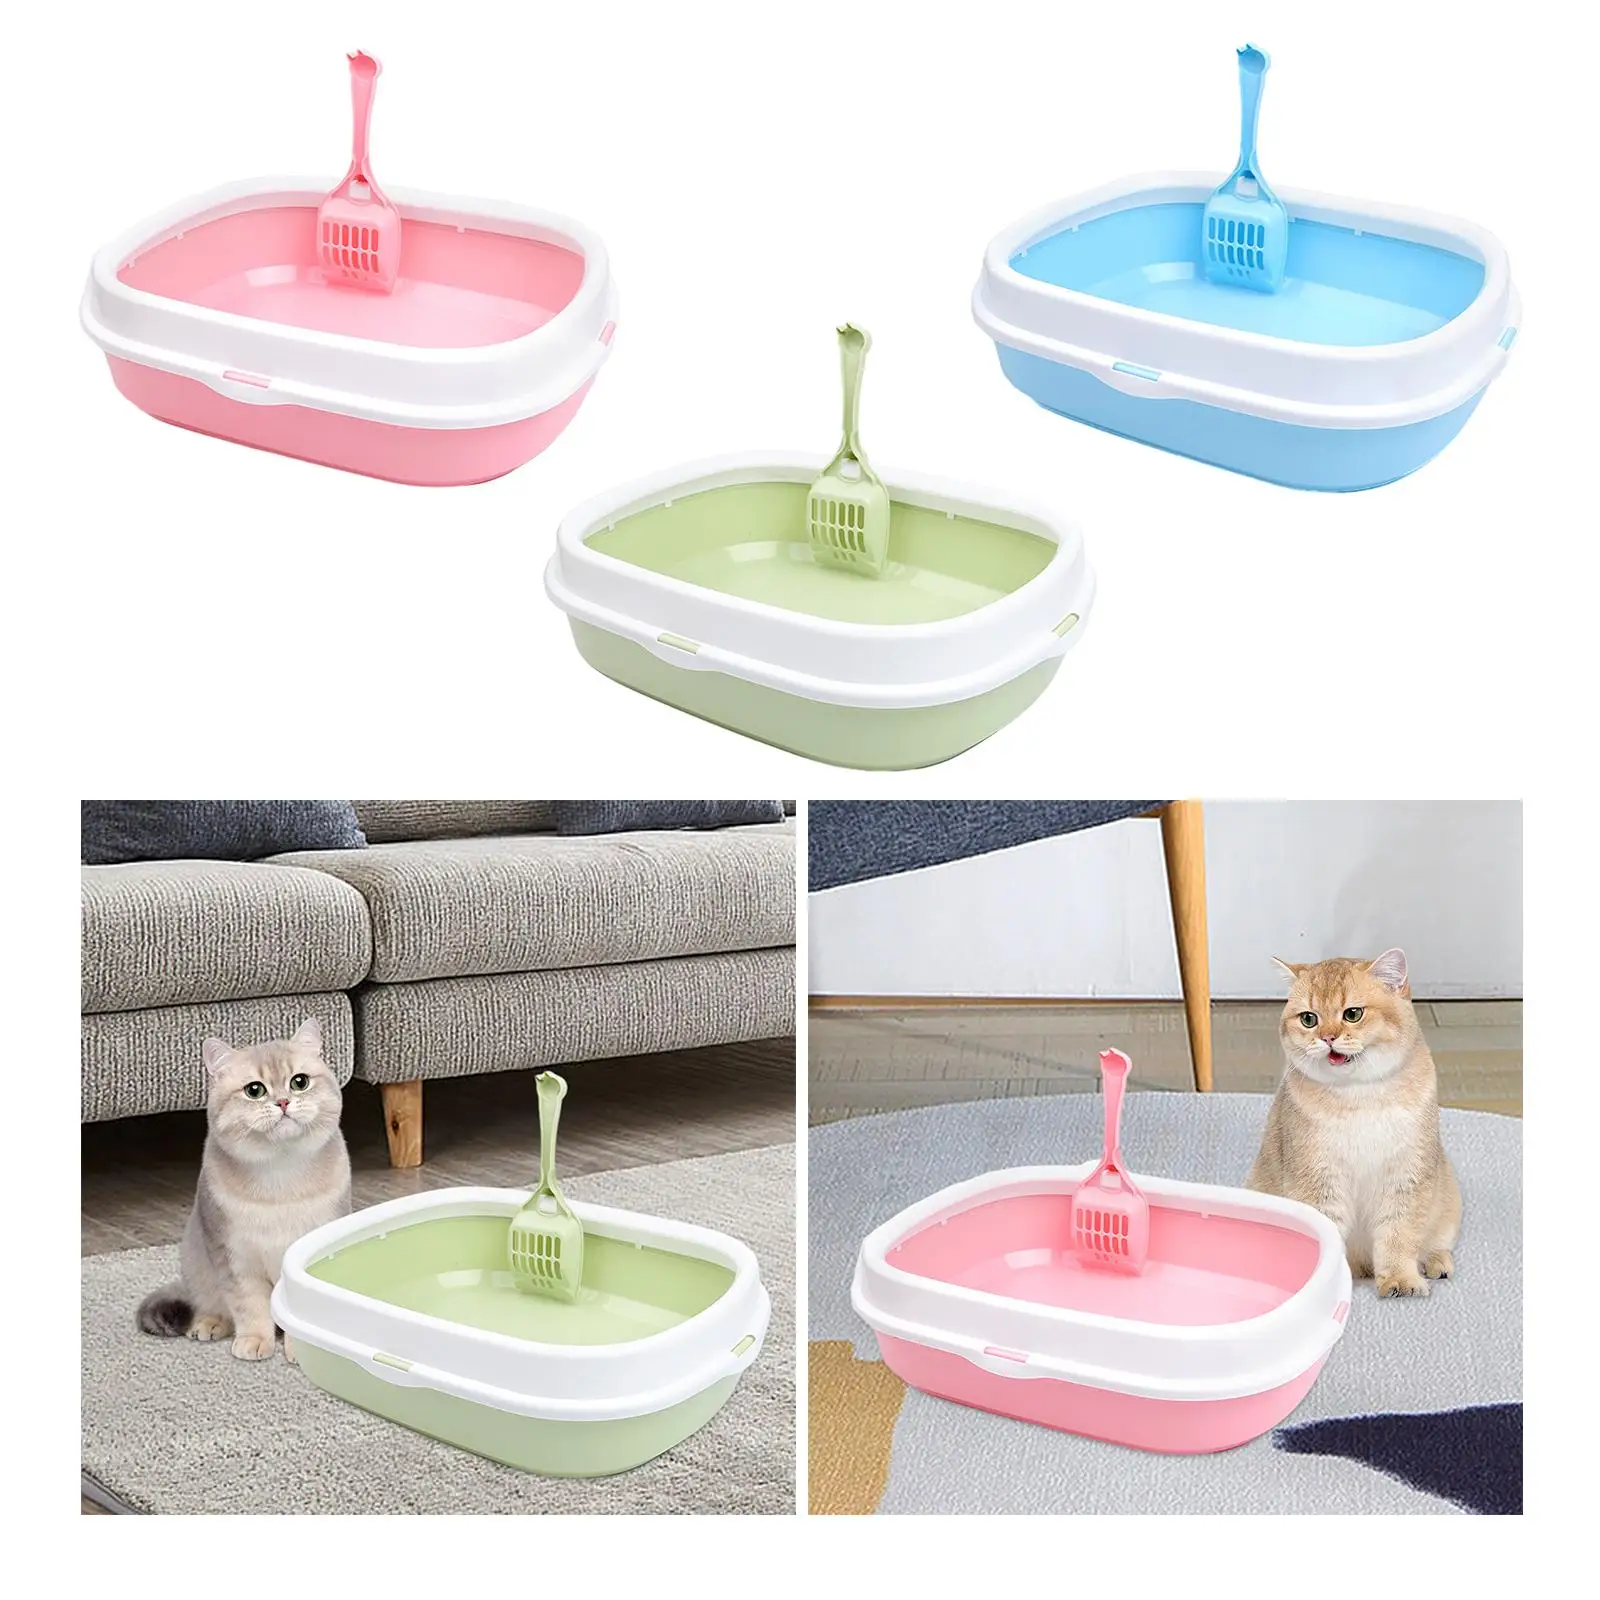 Cat Litter Tray Cat Litter Container Easy Clean Durable Sturdy High Sides